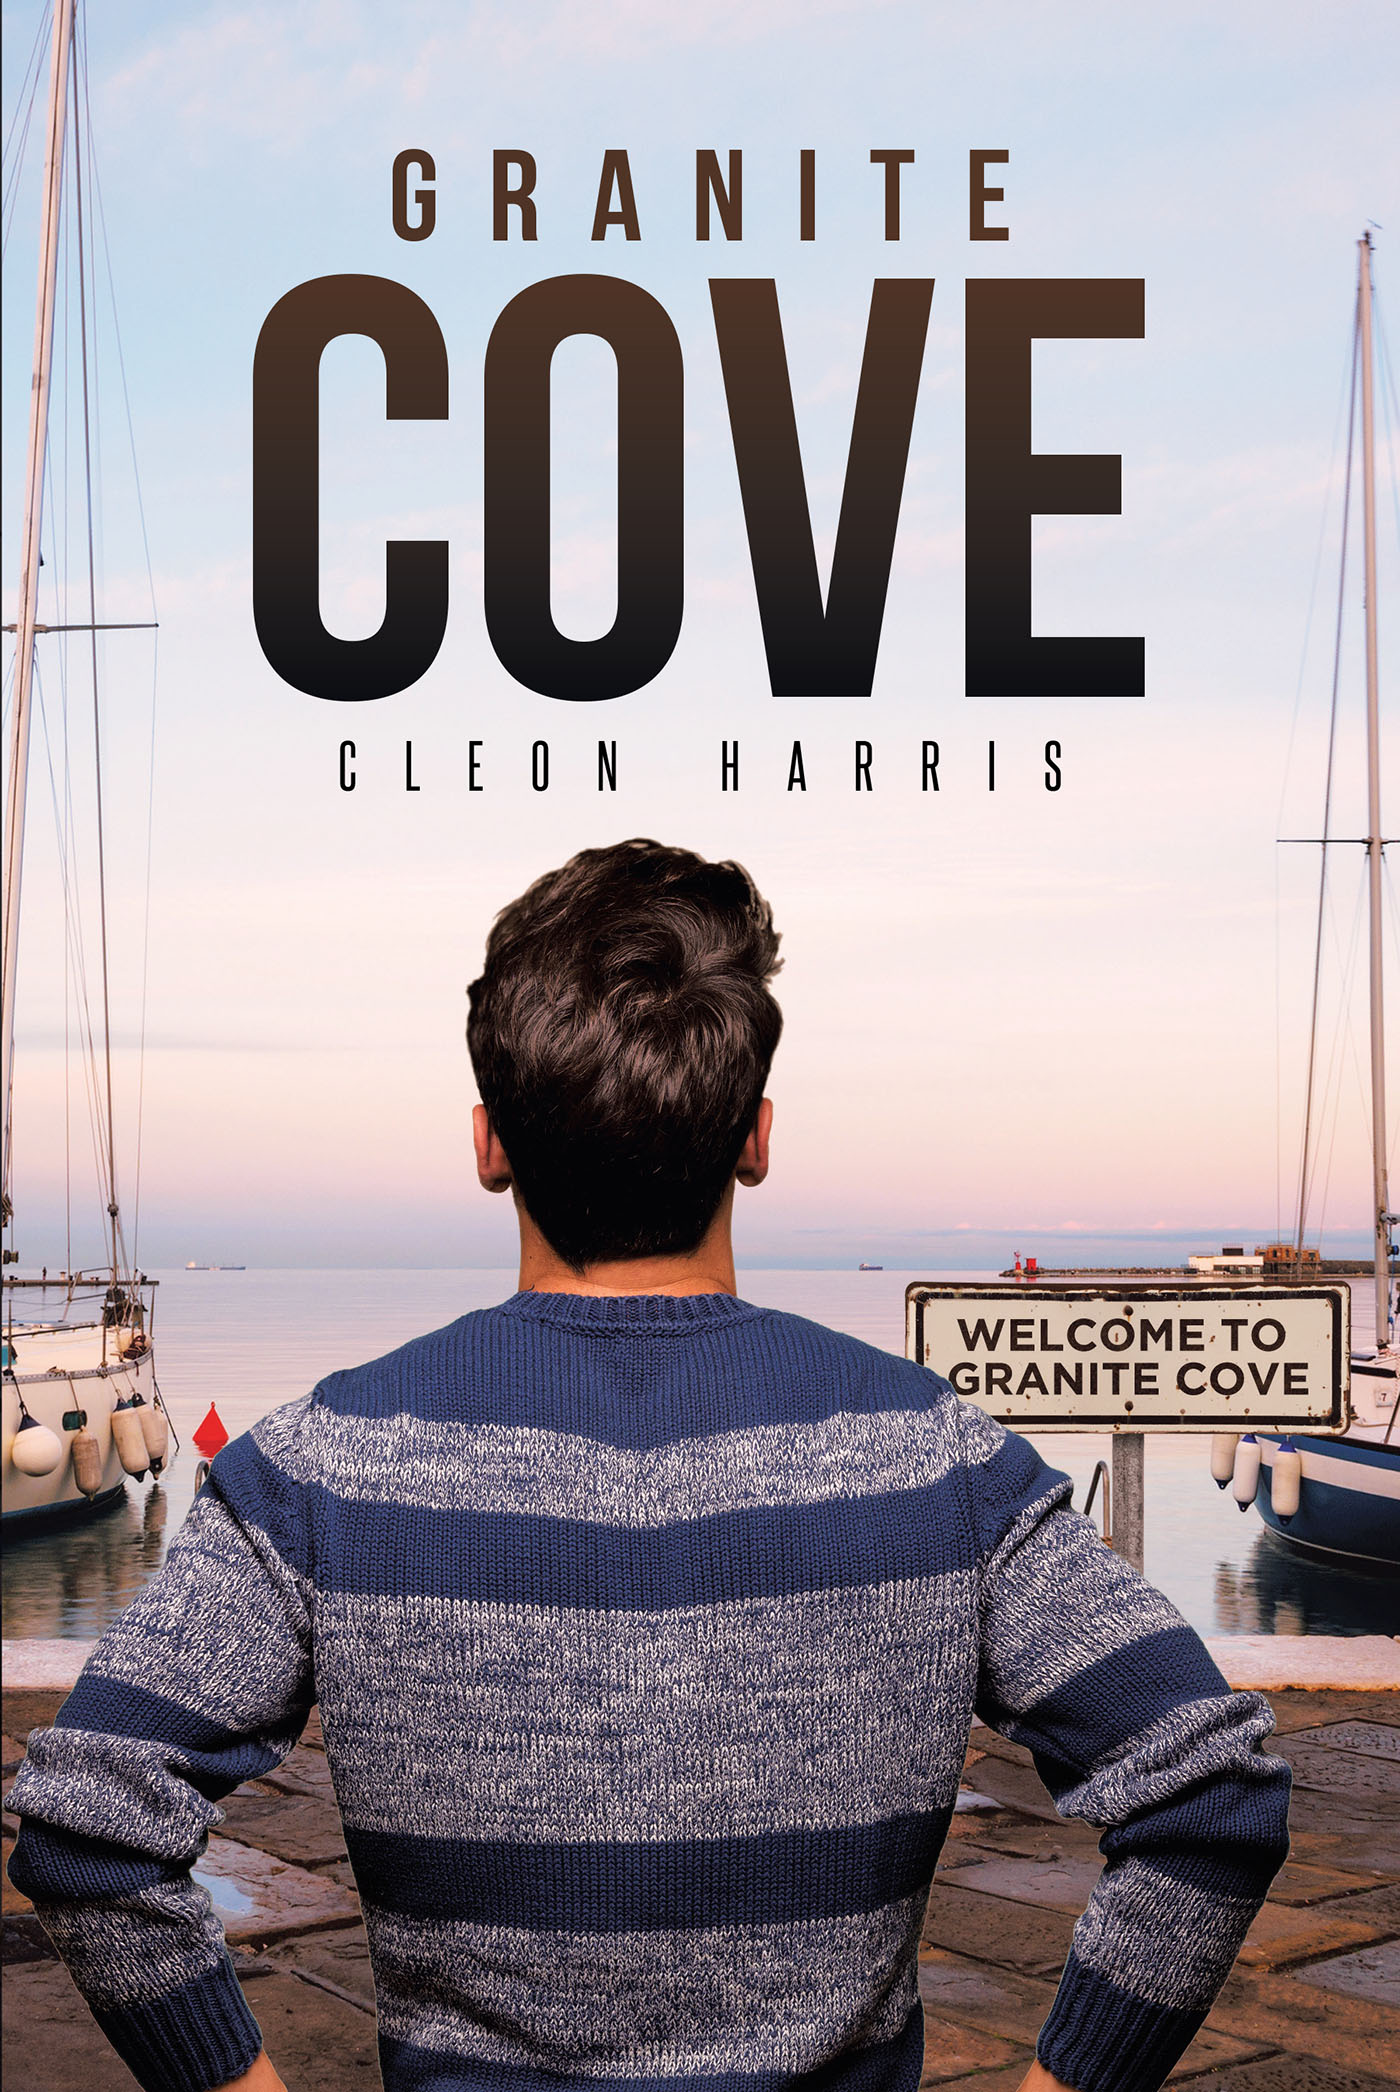 Author Cleon Harris’s New Book, "Granite Cove," Follows a Former Cia Agent Investigating the Questionable Circumstances Surrounding a Mysterious Death